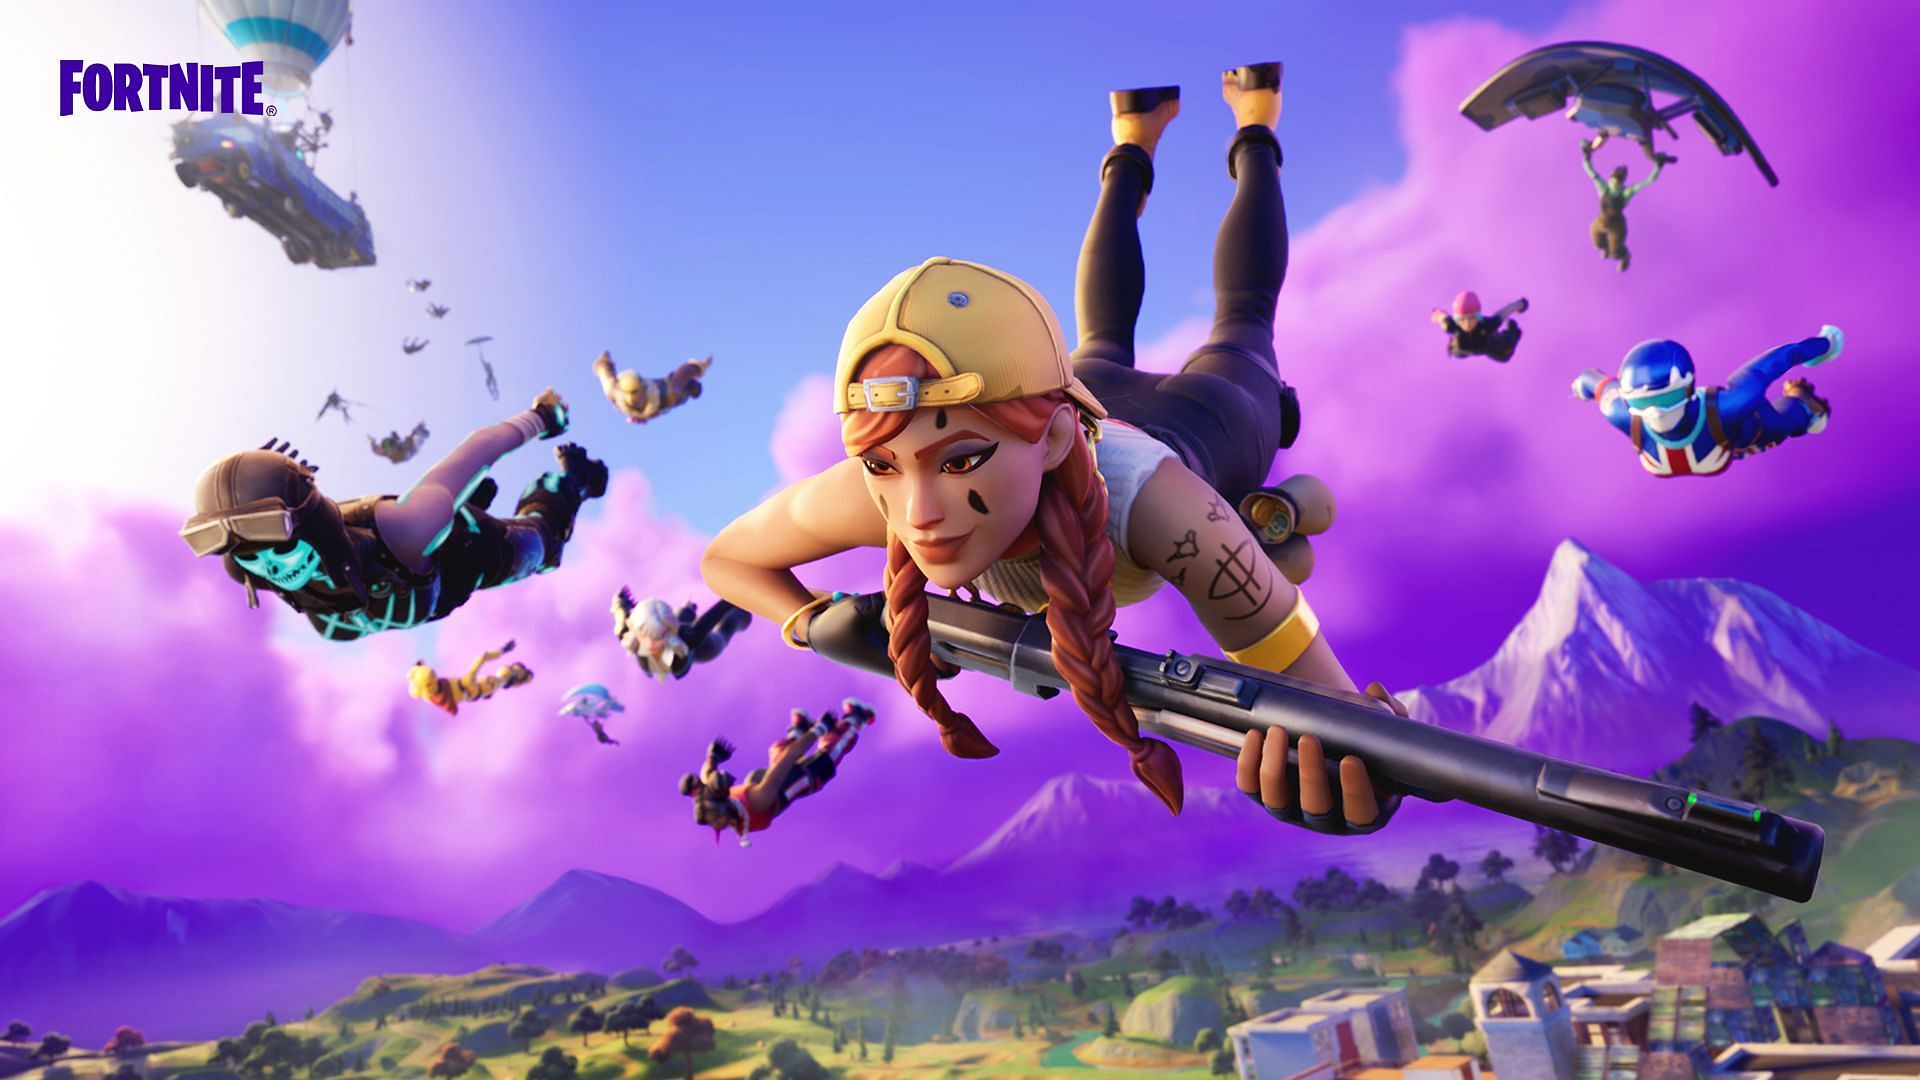 Late Game Arena triggered the latest Fortnite ban wave (Image via Epic Games)